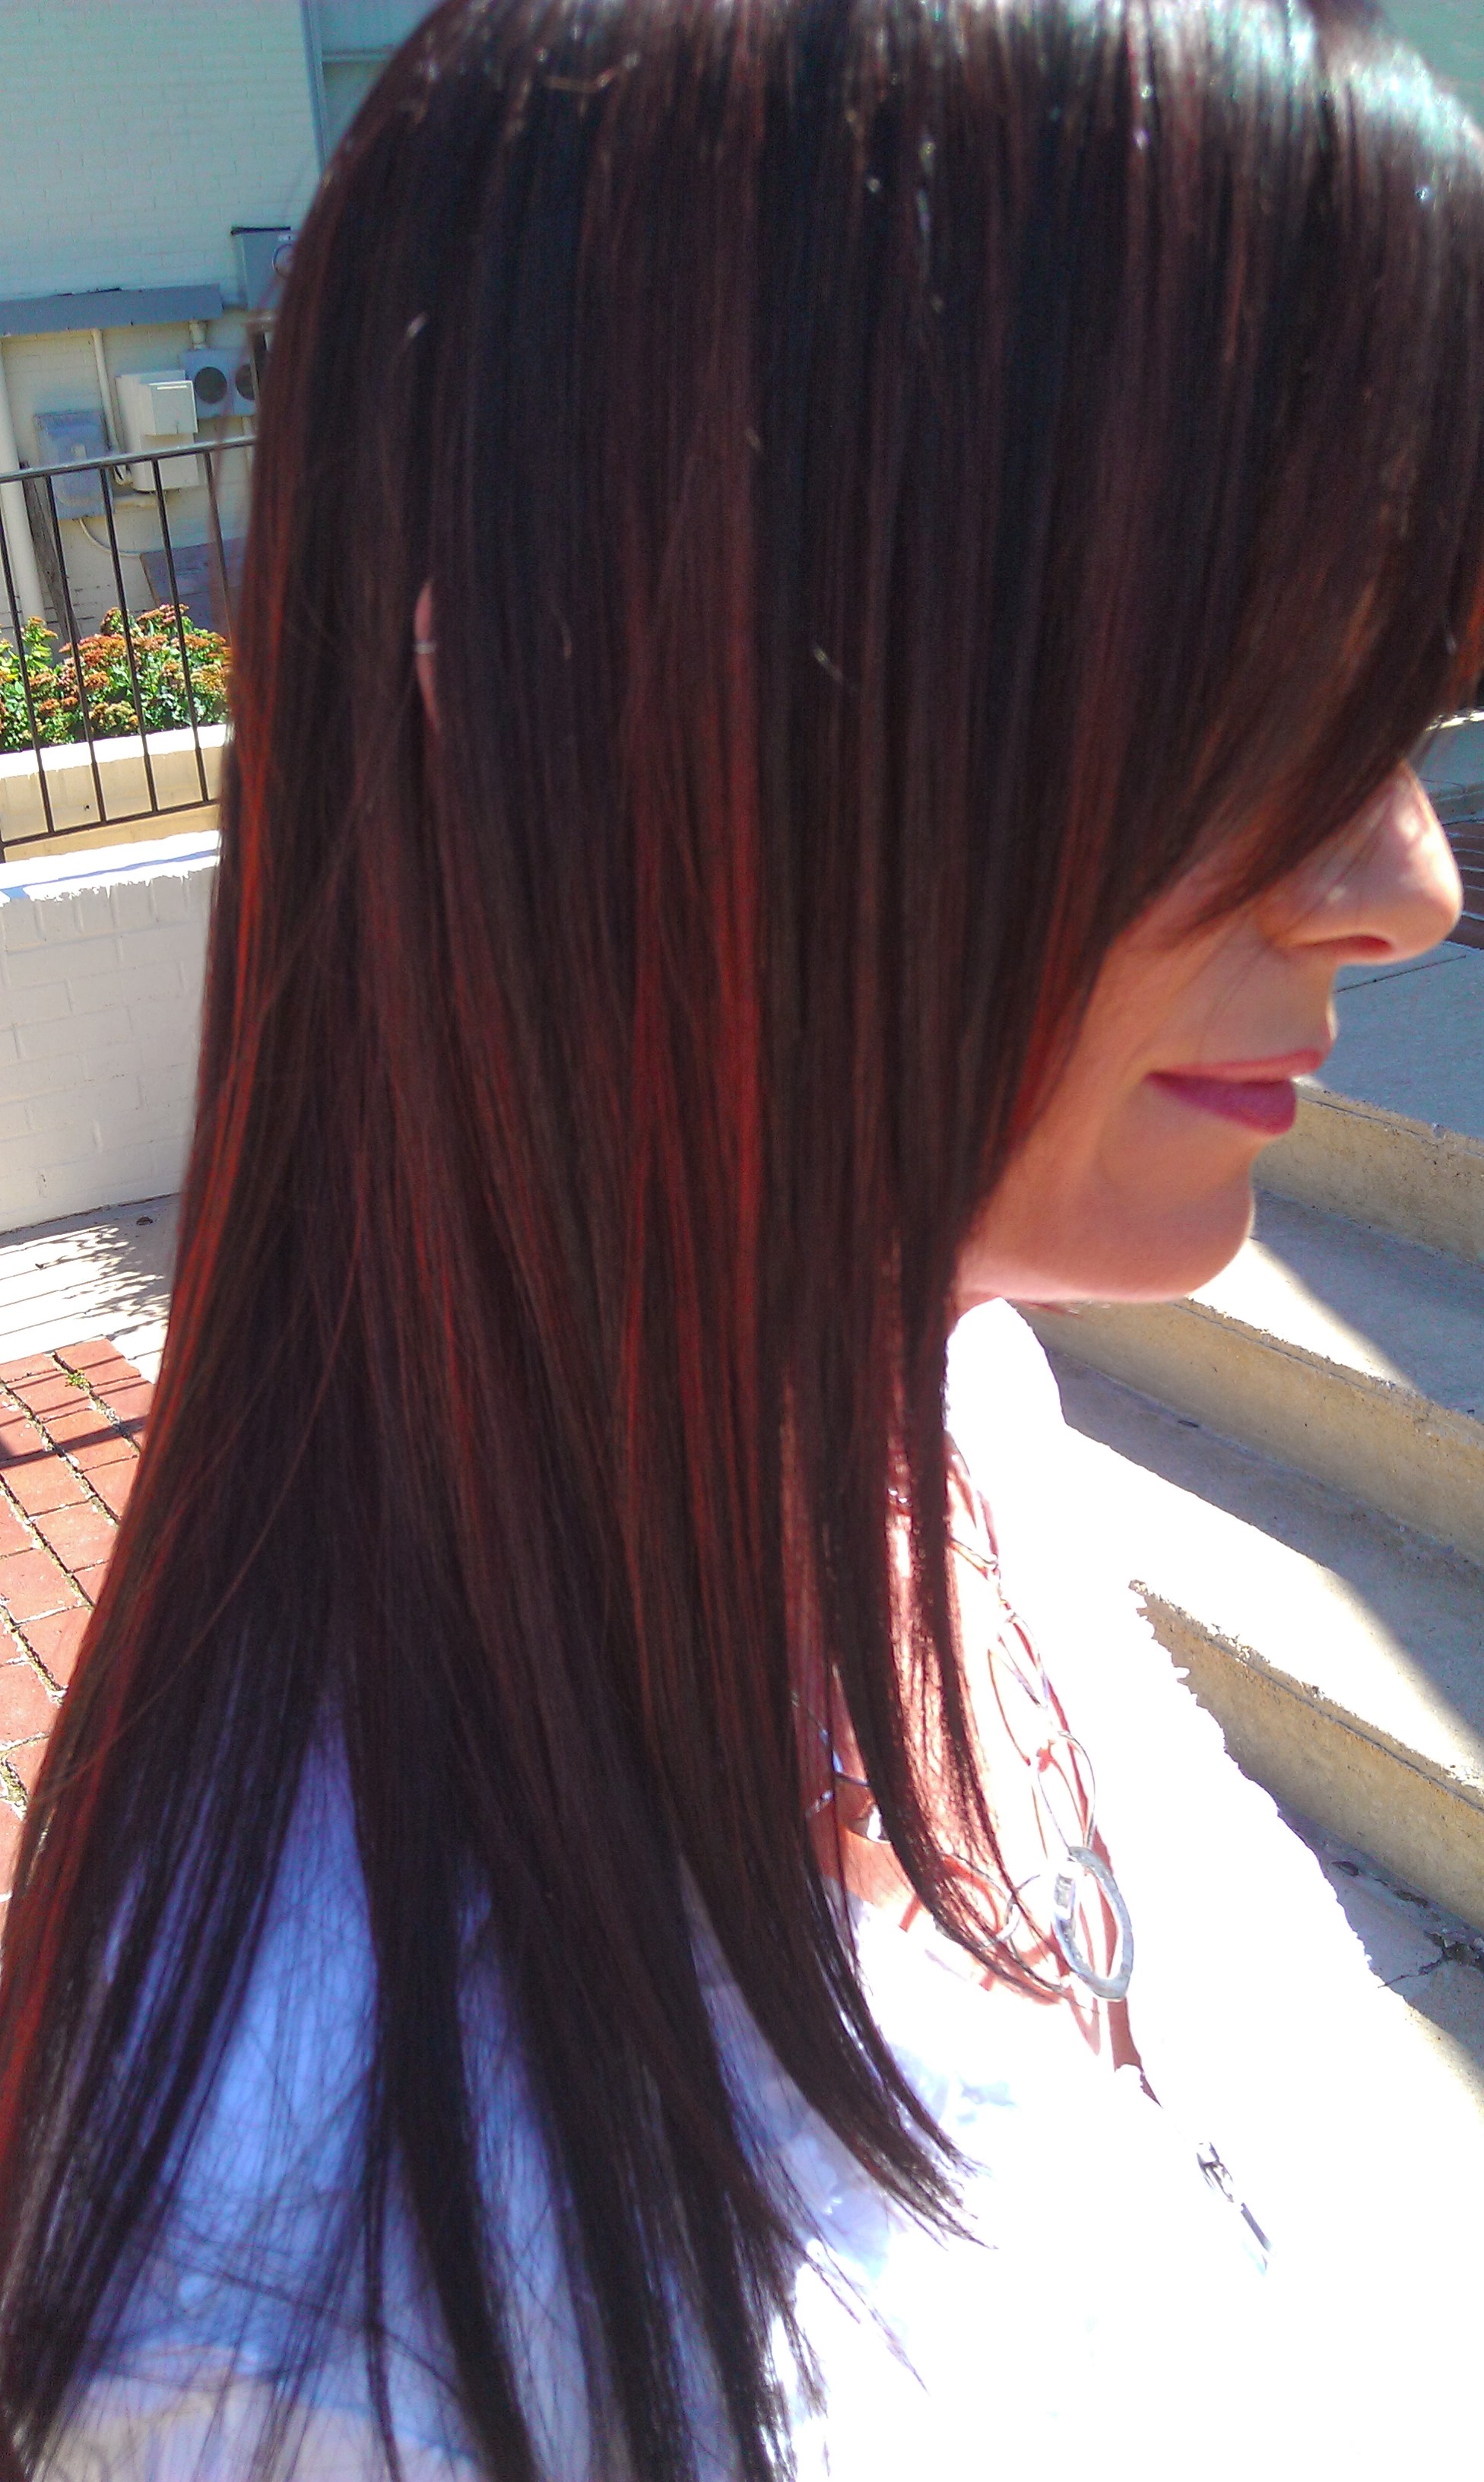 Ever want to try red violet raspberry highlights?